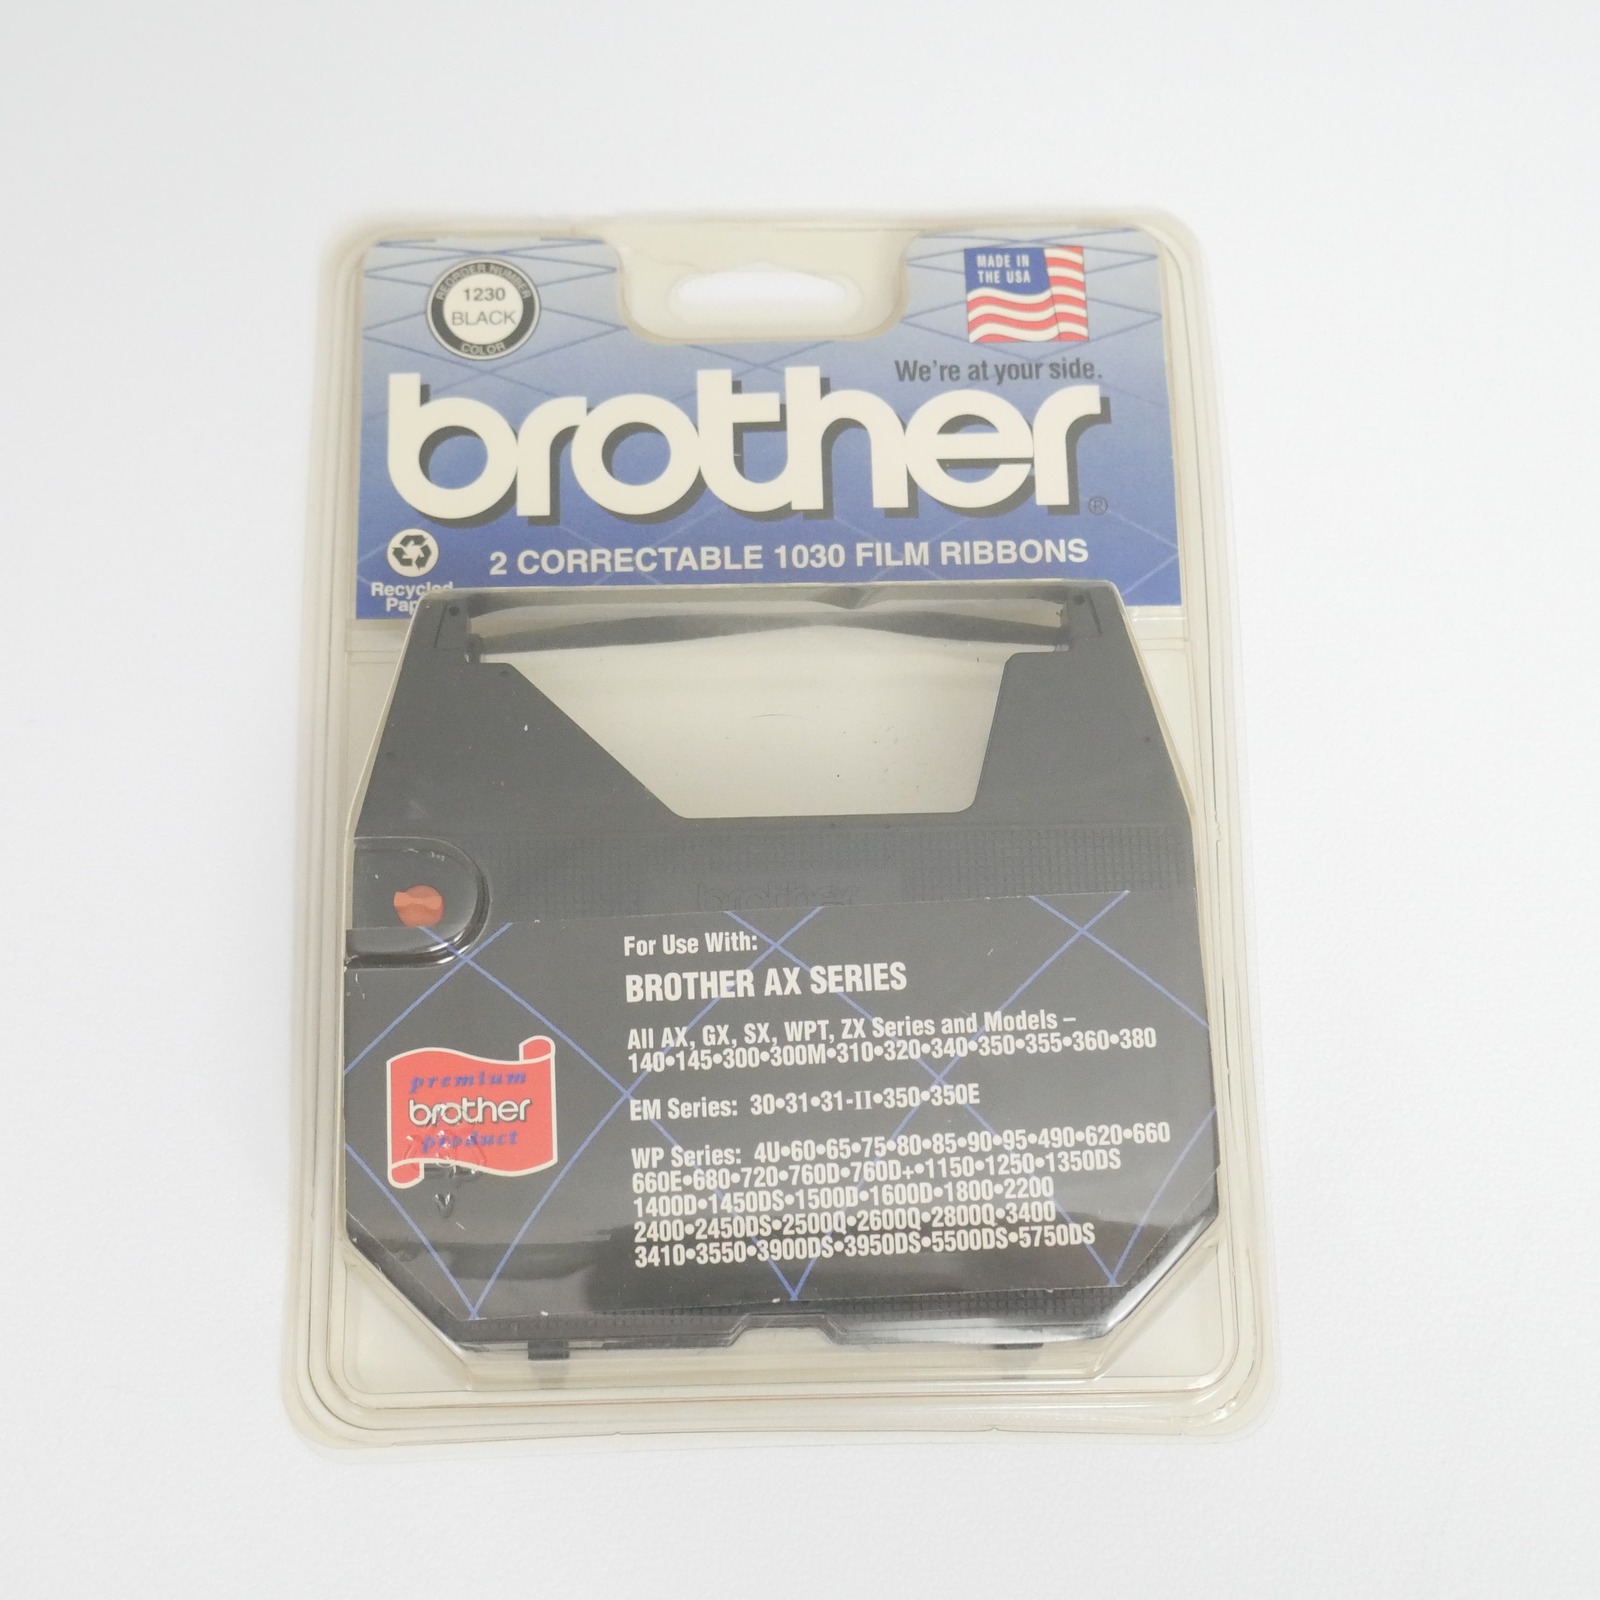 Brother Correctable 1030 Film Ribbons (2 Pack) - $10.88